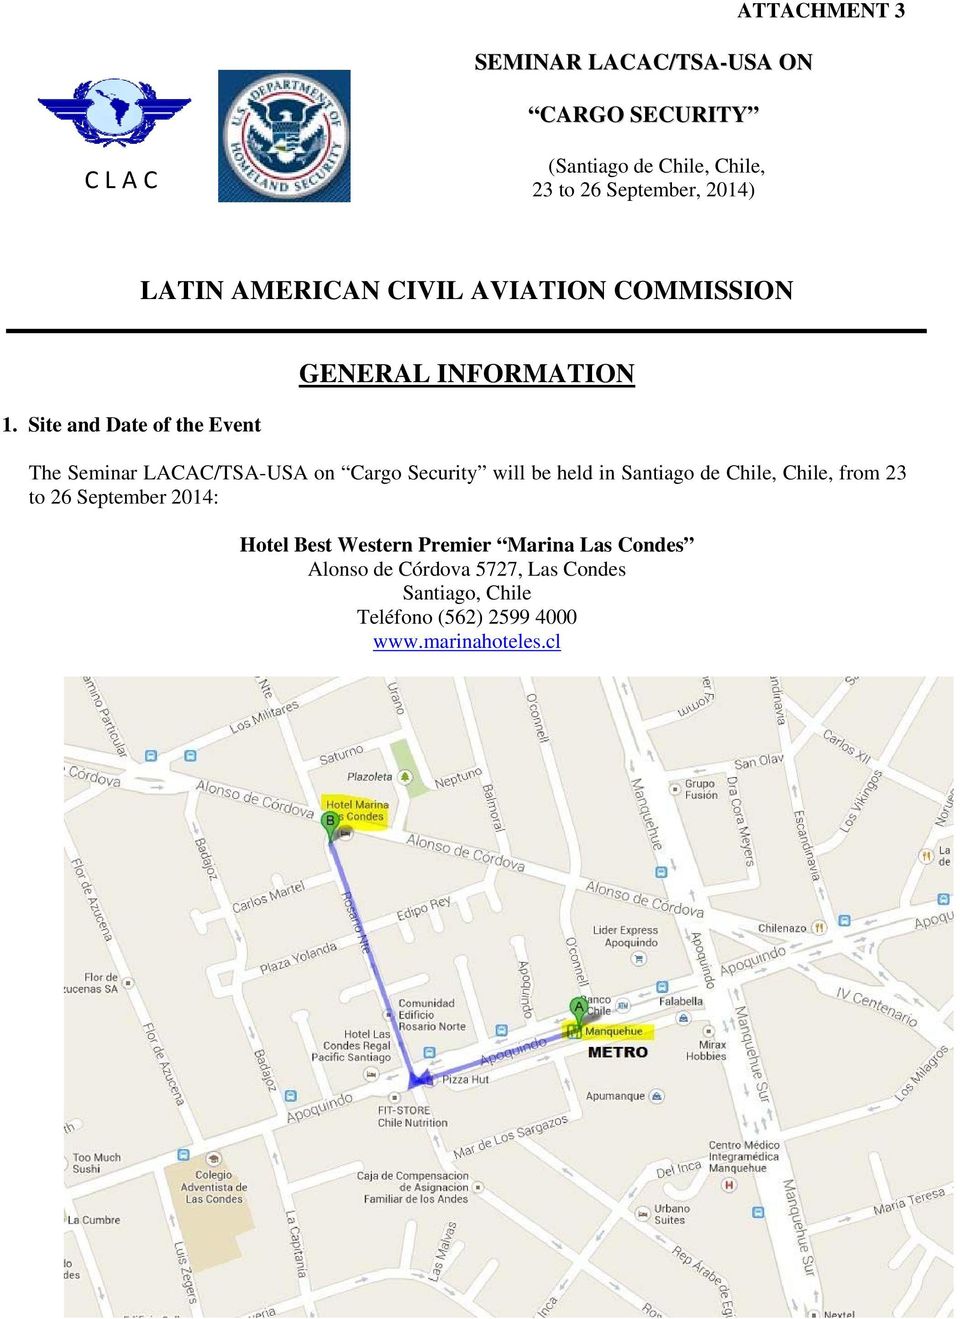 Site and Date of the Event GENERAL INFORMATION The Seminar LACAC/TSA-USA on Cargo Security will be held in